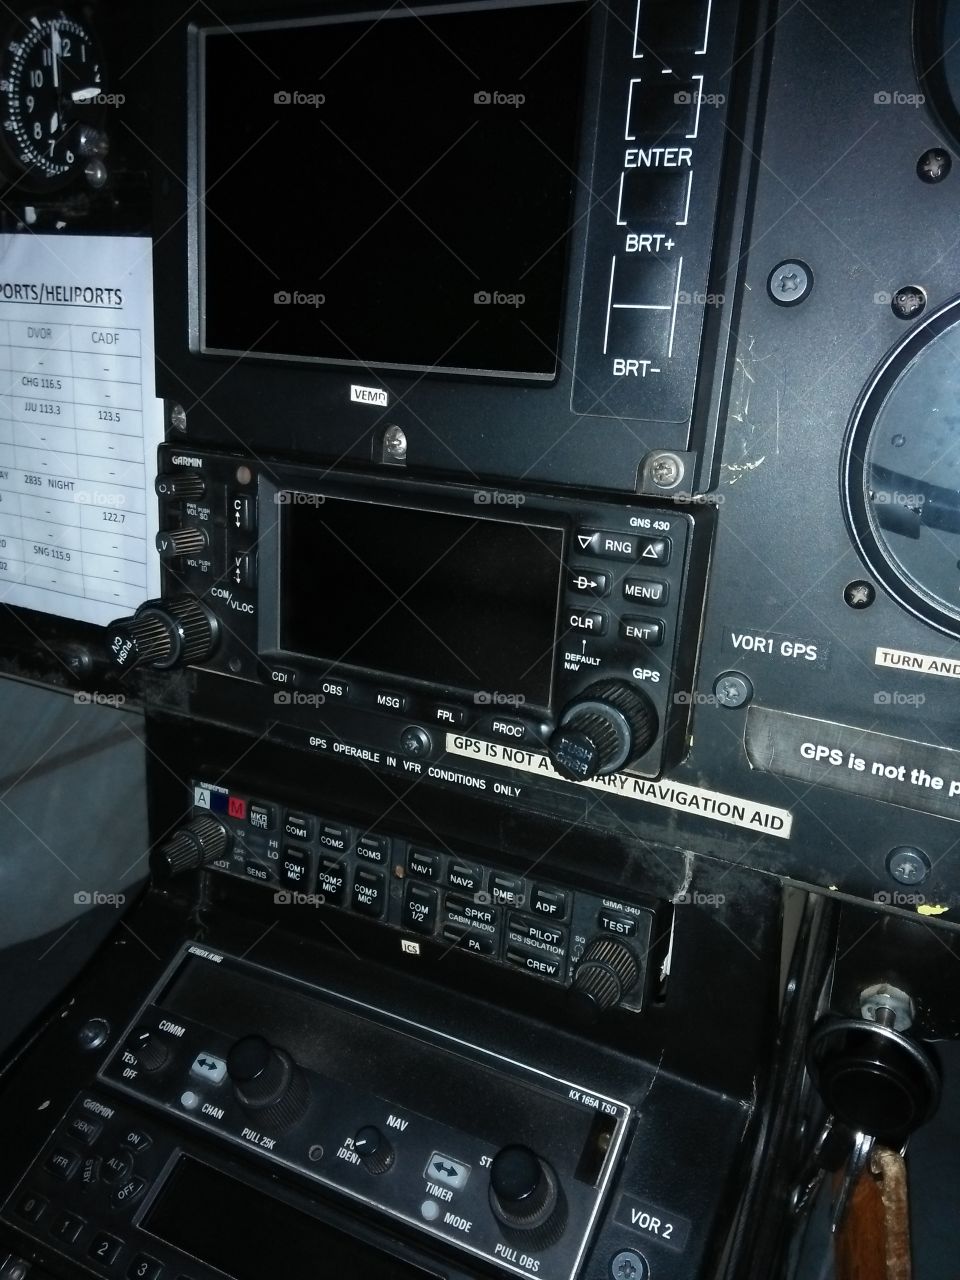 cabin of helicopter